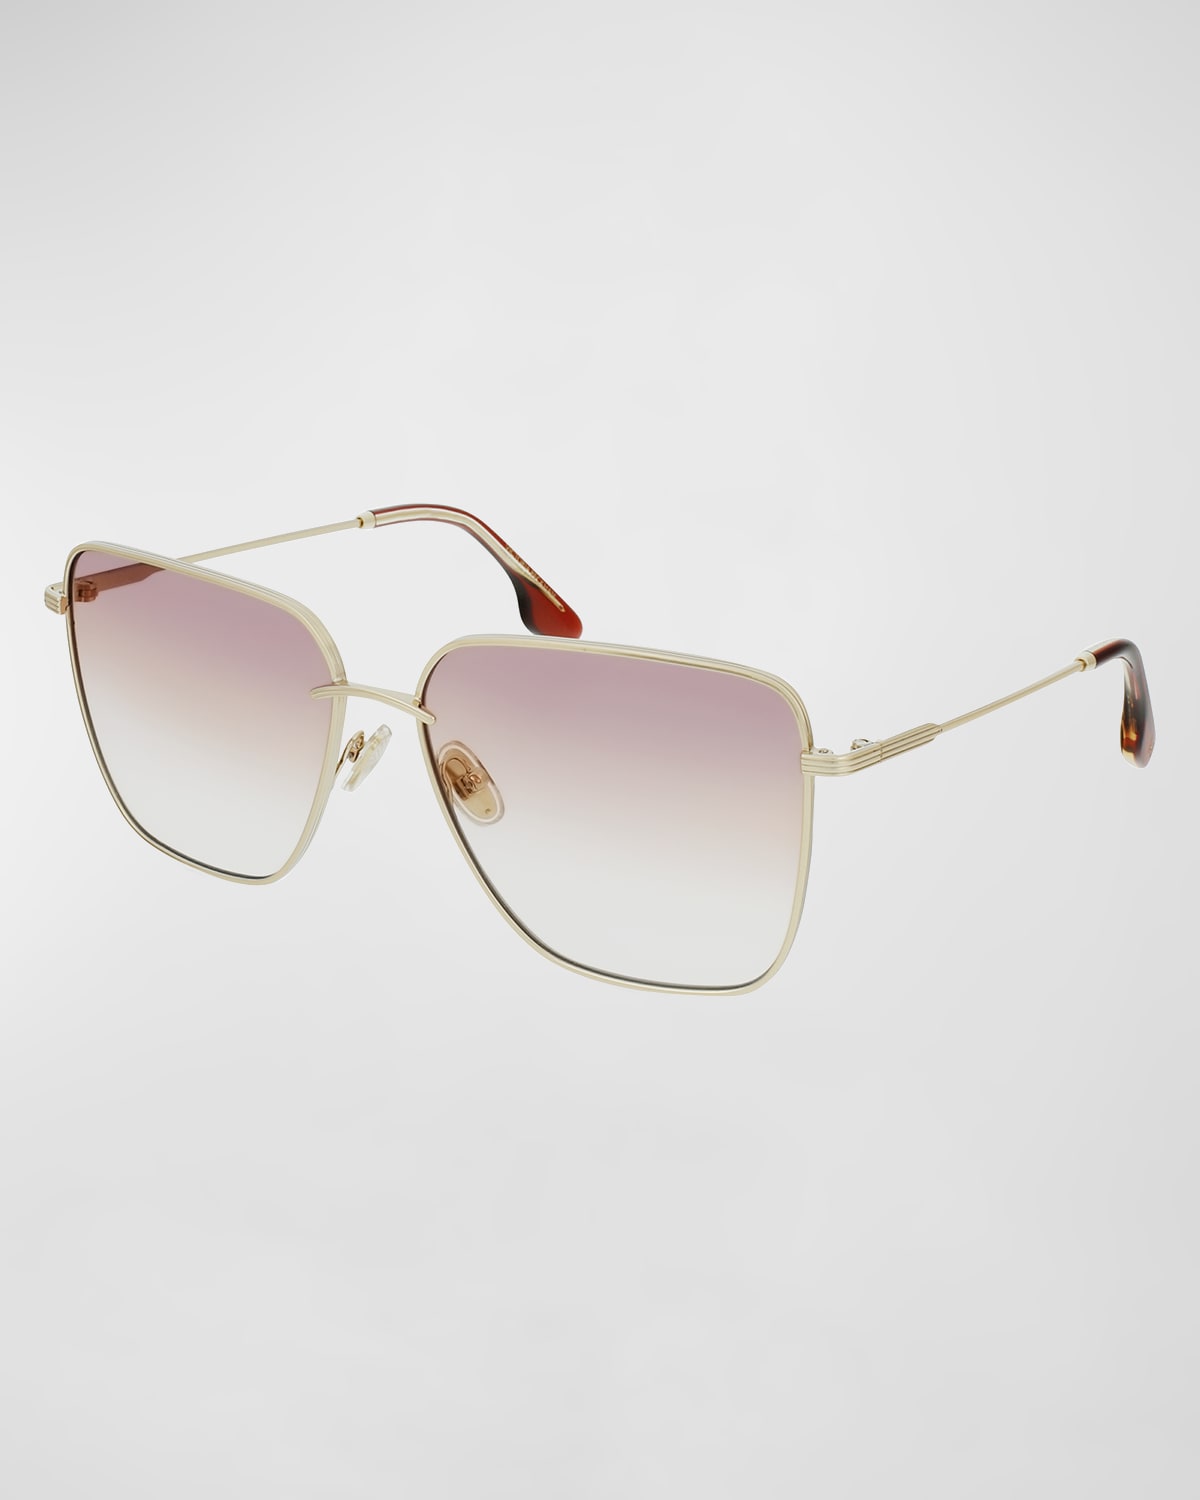 Victoria Beckham Oversized Square Hammered Metal Sunglasses In Gold/purple Peach